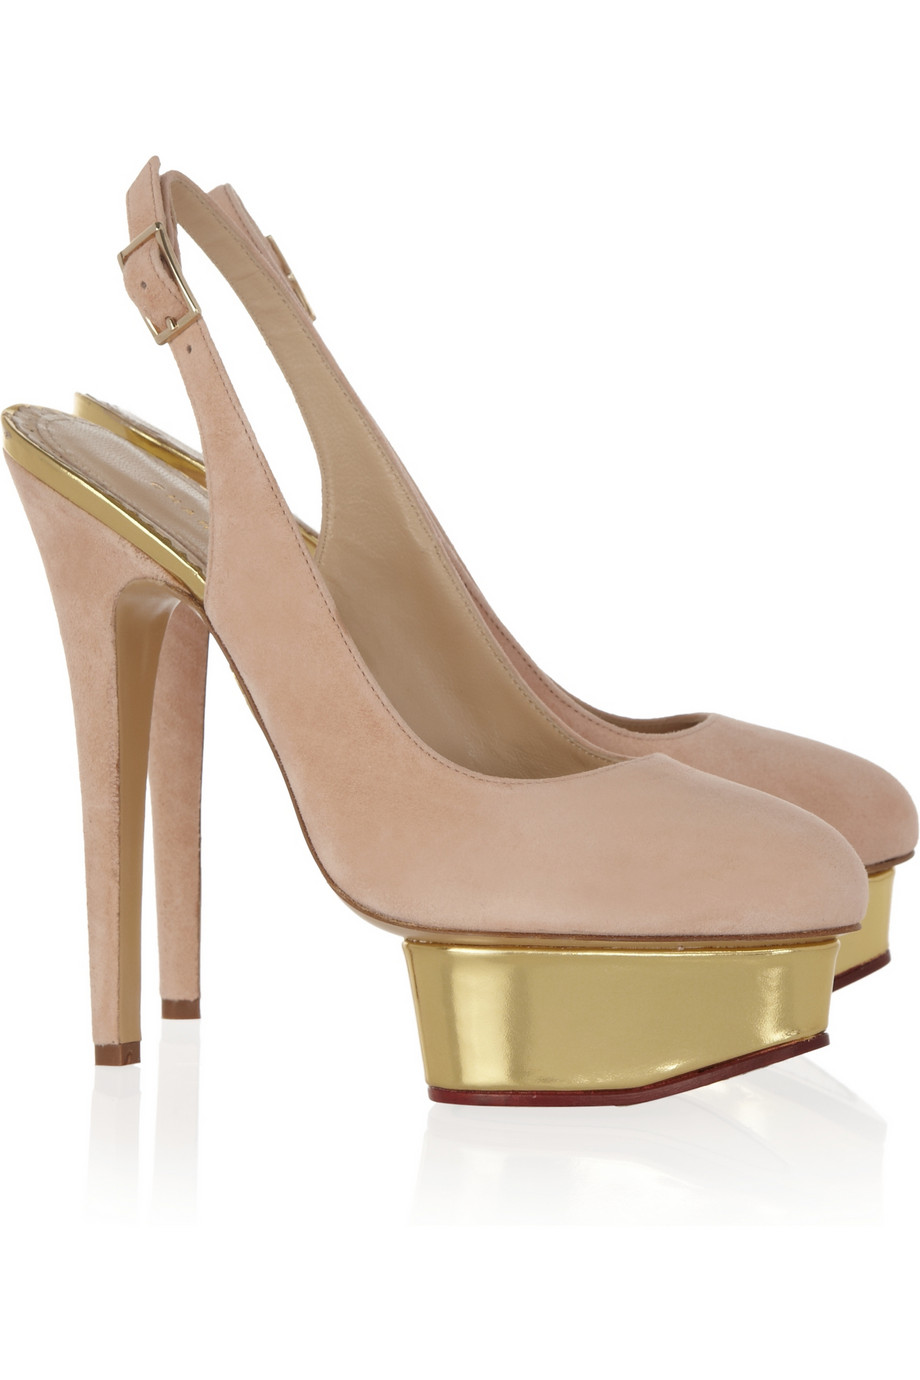 Charlotte Olympia The Dolly Suede Slingback Pumps in Pink (gold) | Lyst